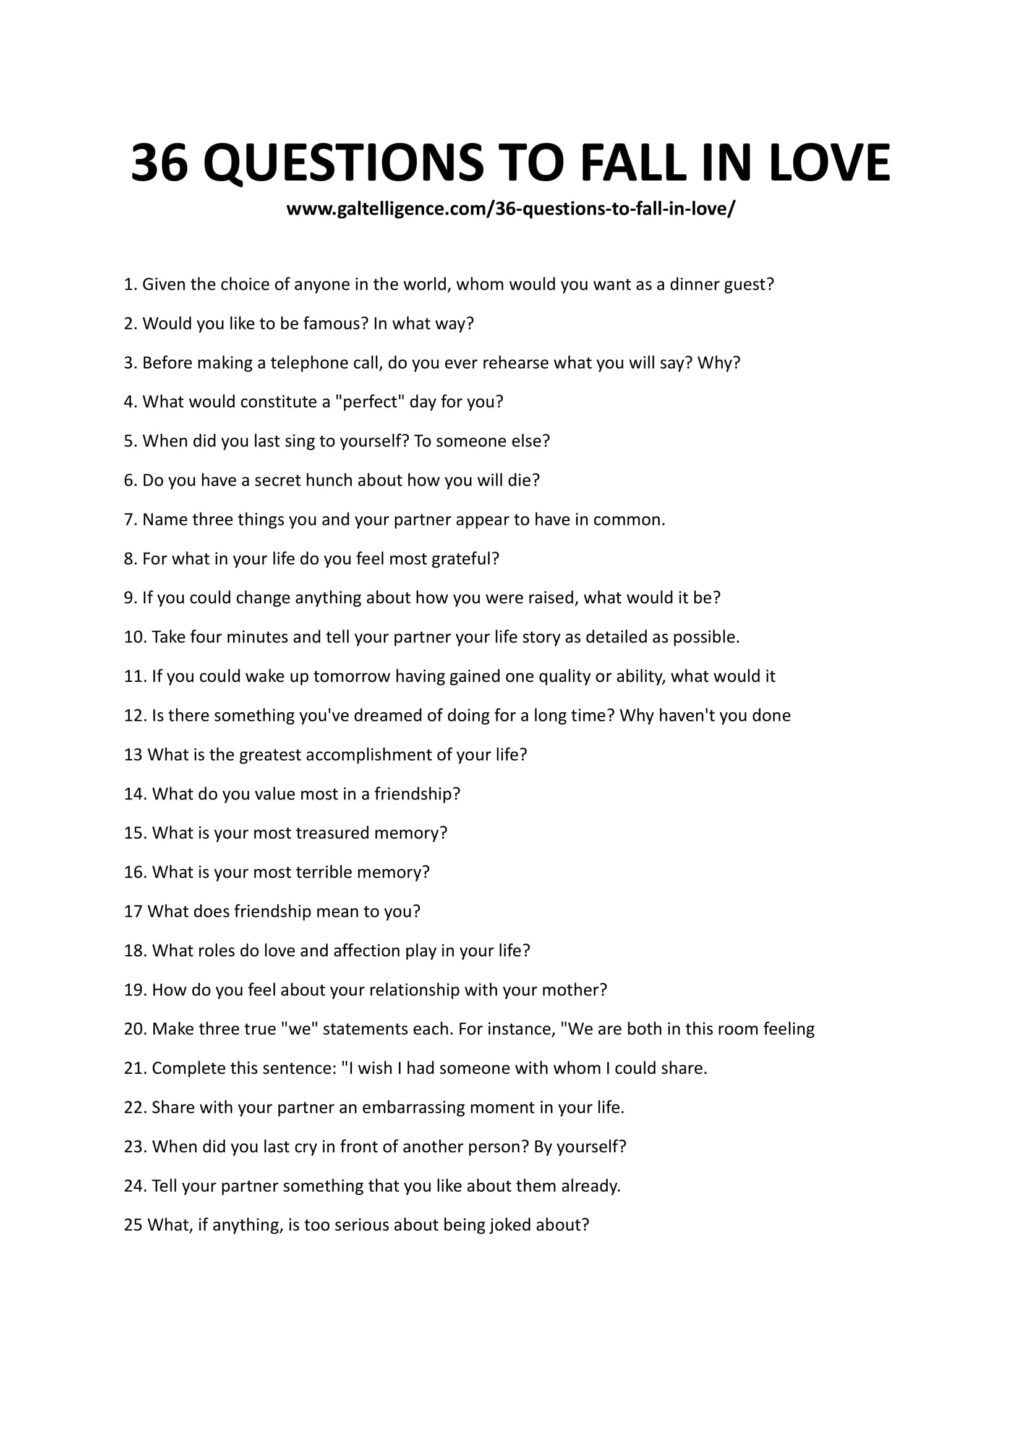 36 questions to fall in love research paper